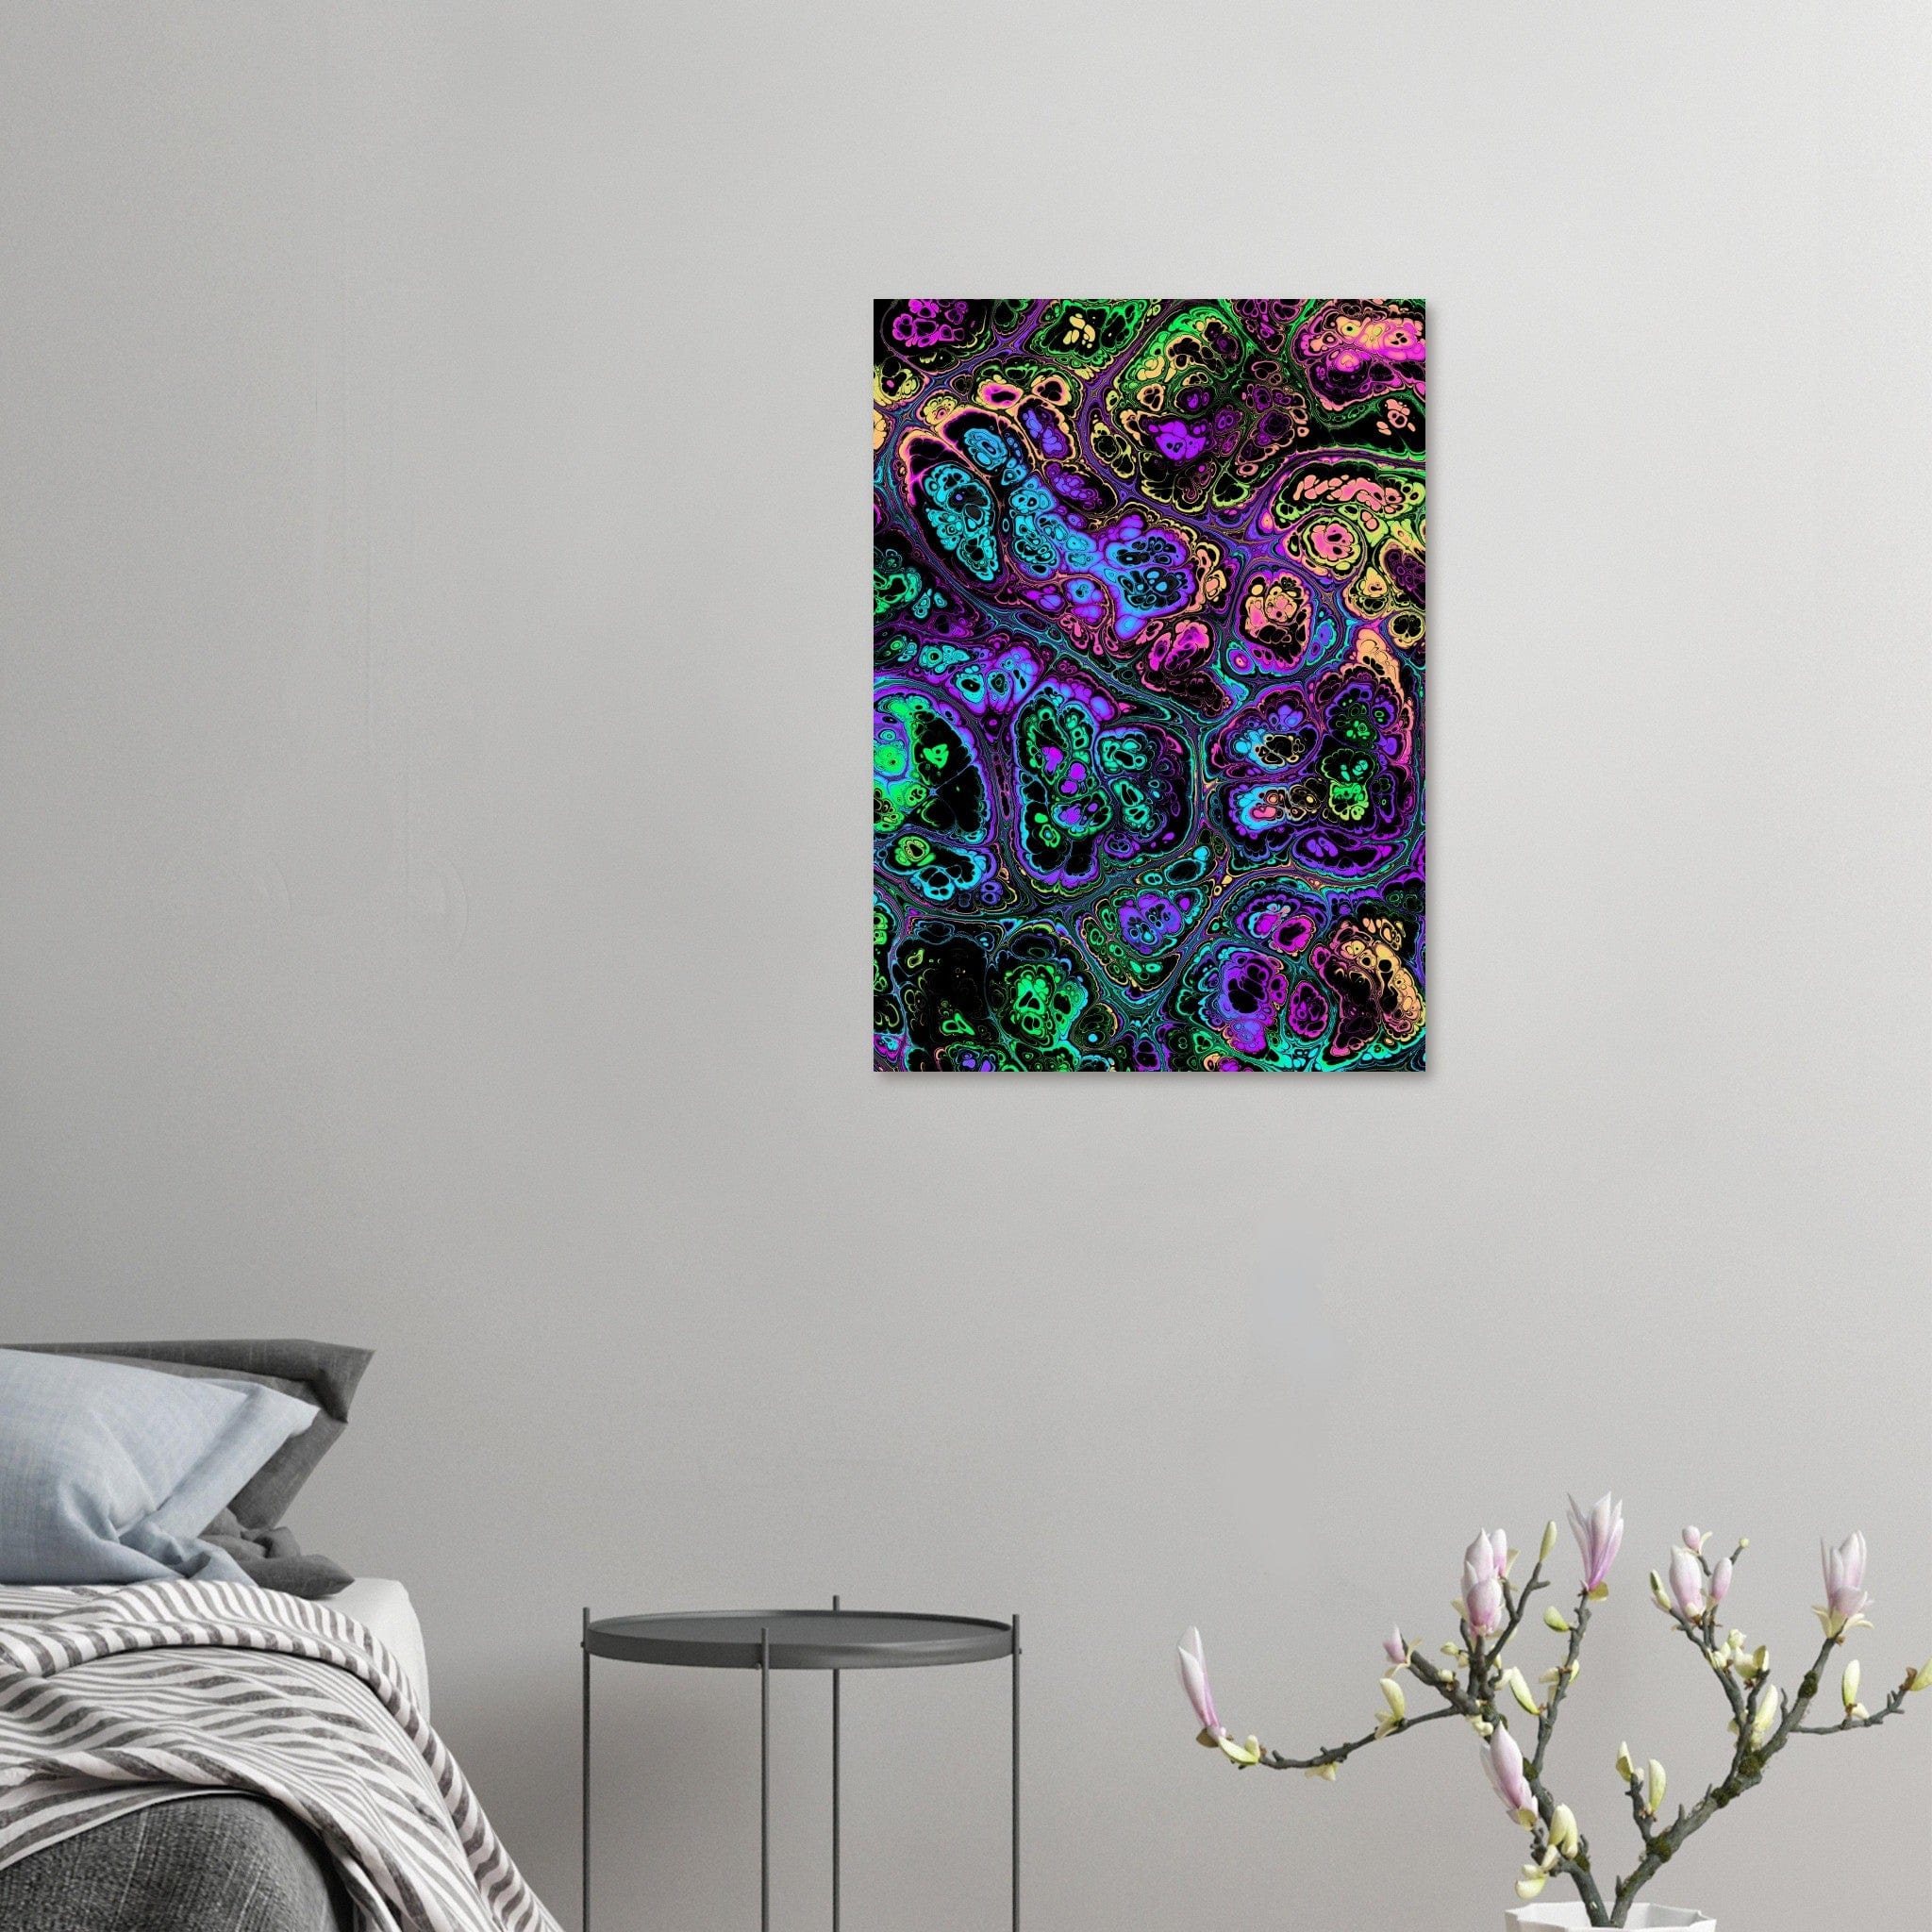 Little Squiffy Print Material 50x70 cm / 20x28″ / Vertical Neon Psychedelic Marble Aluminum Print Wall Art